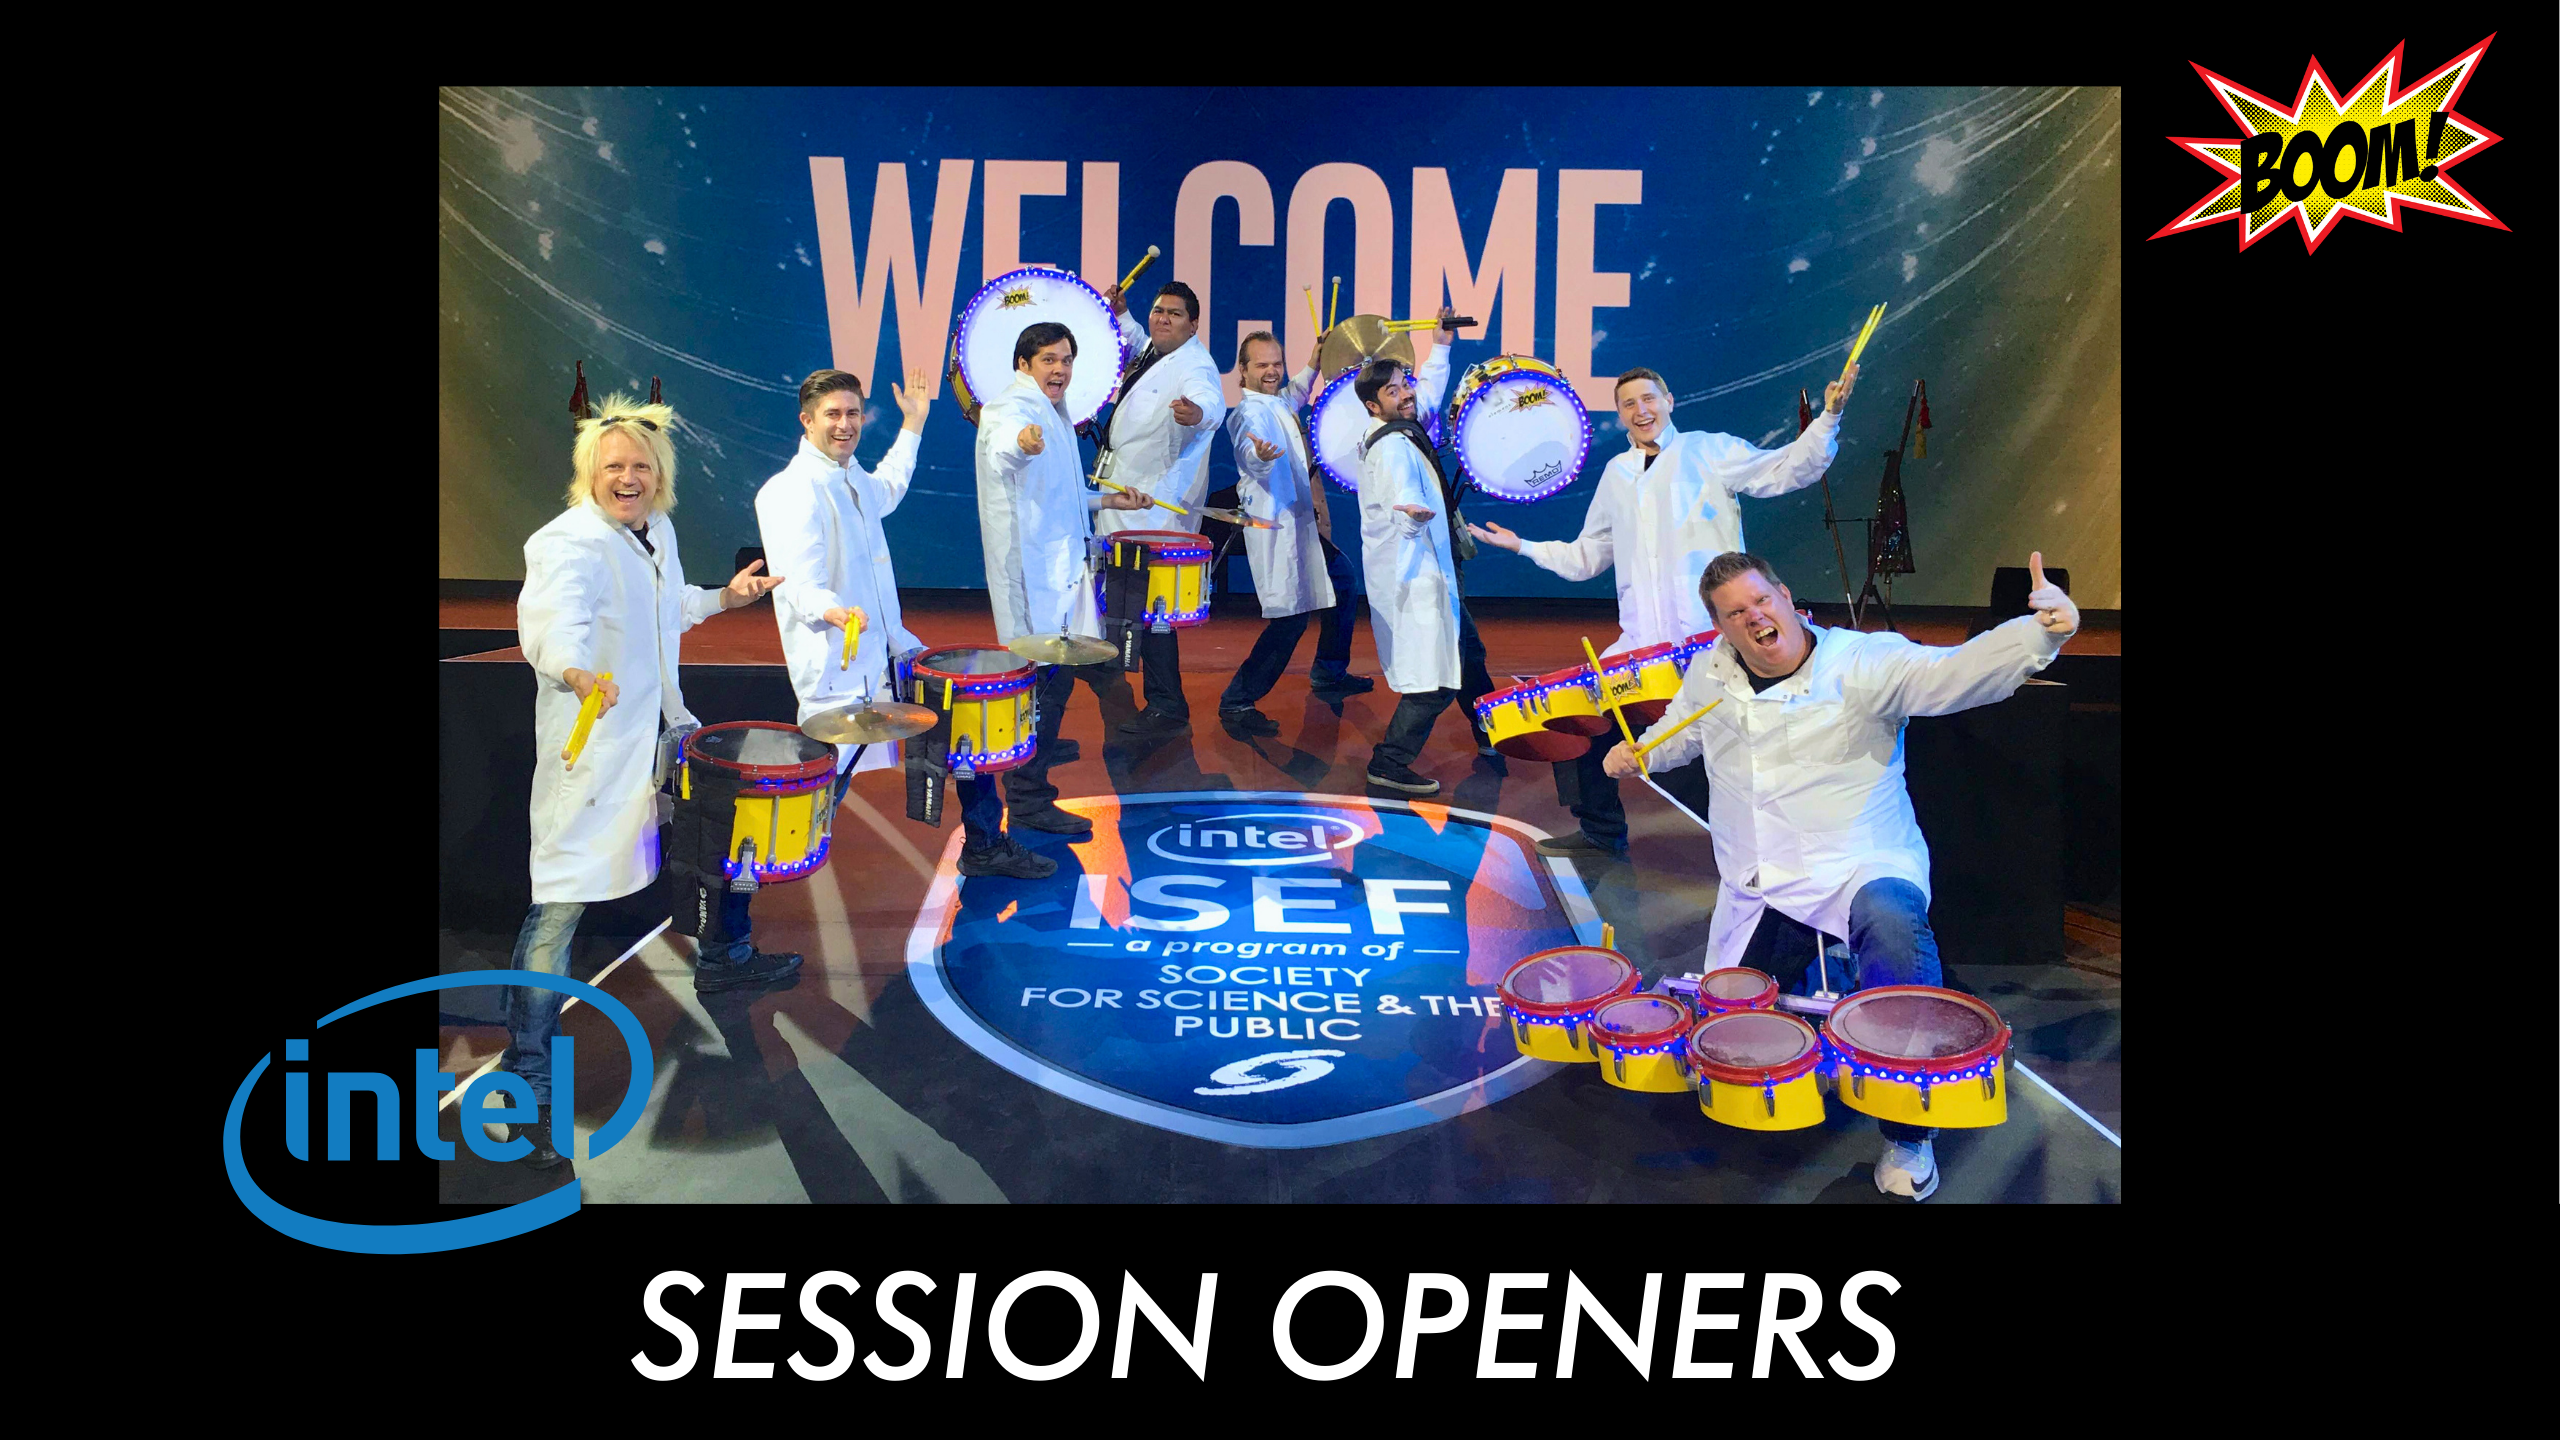 Session Openers